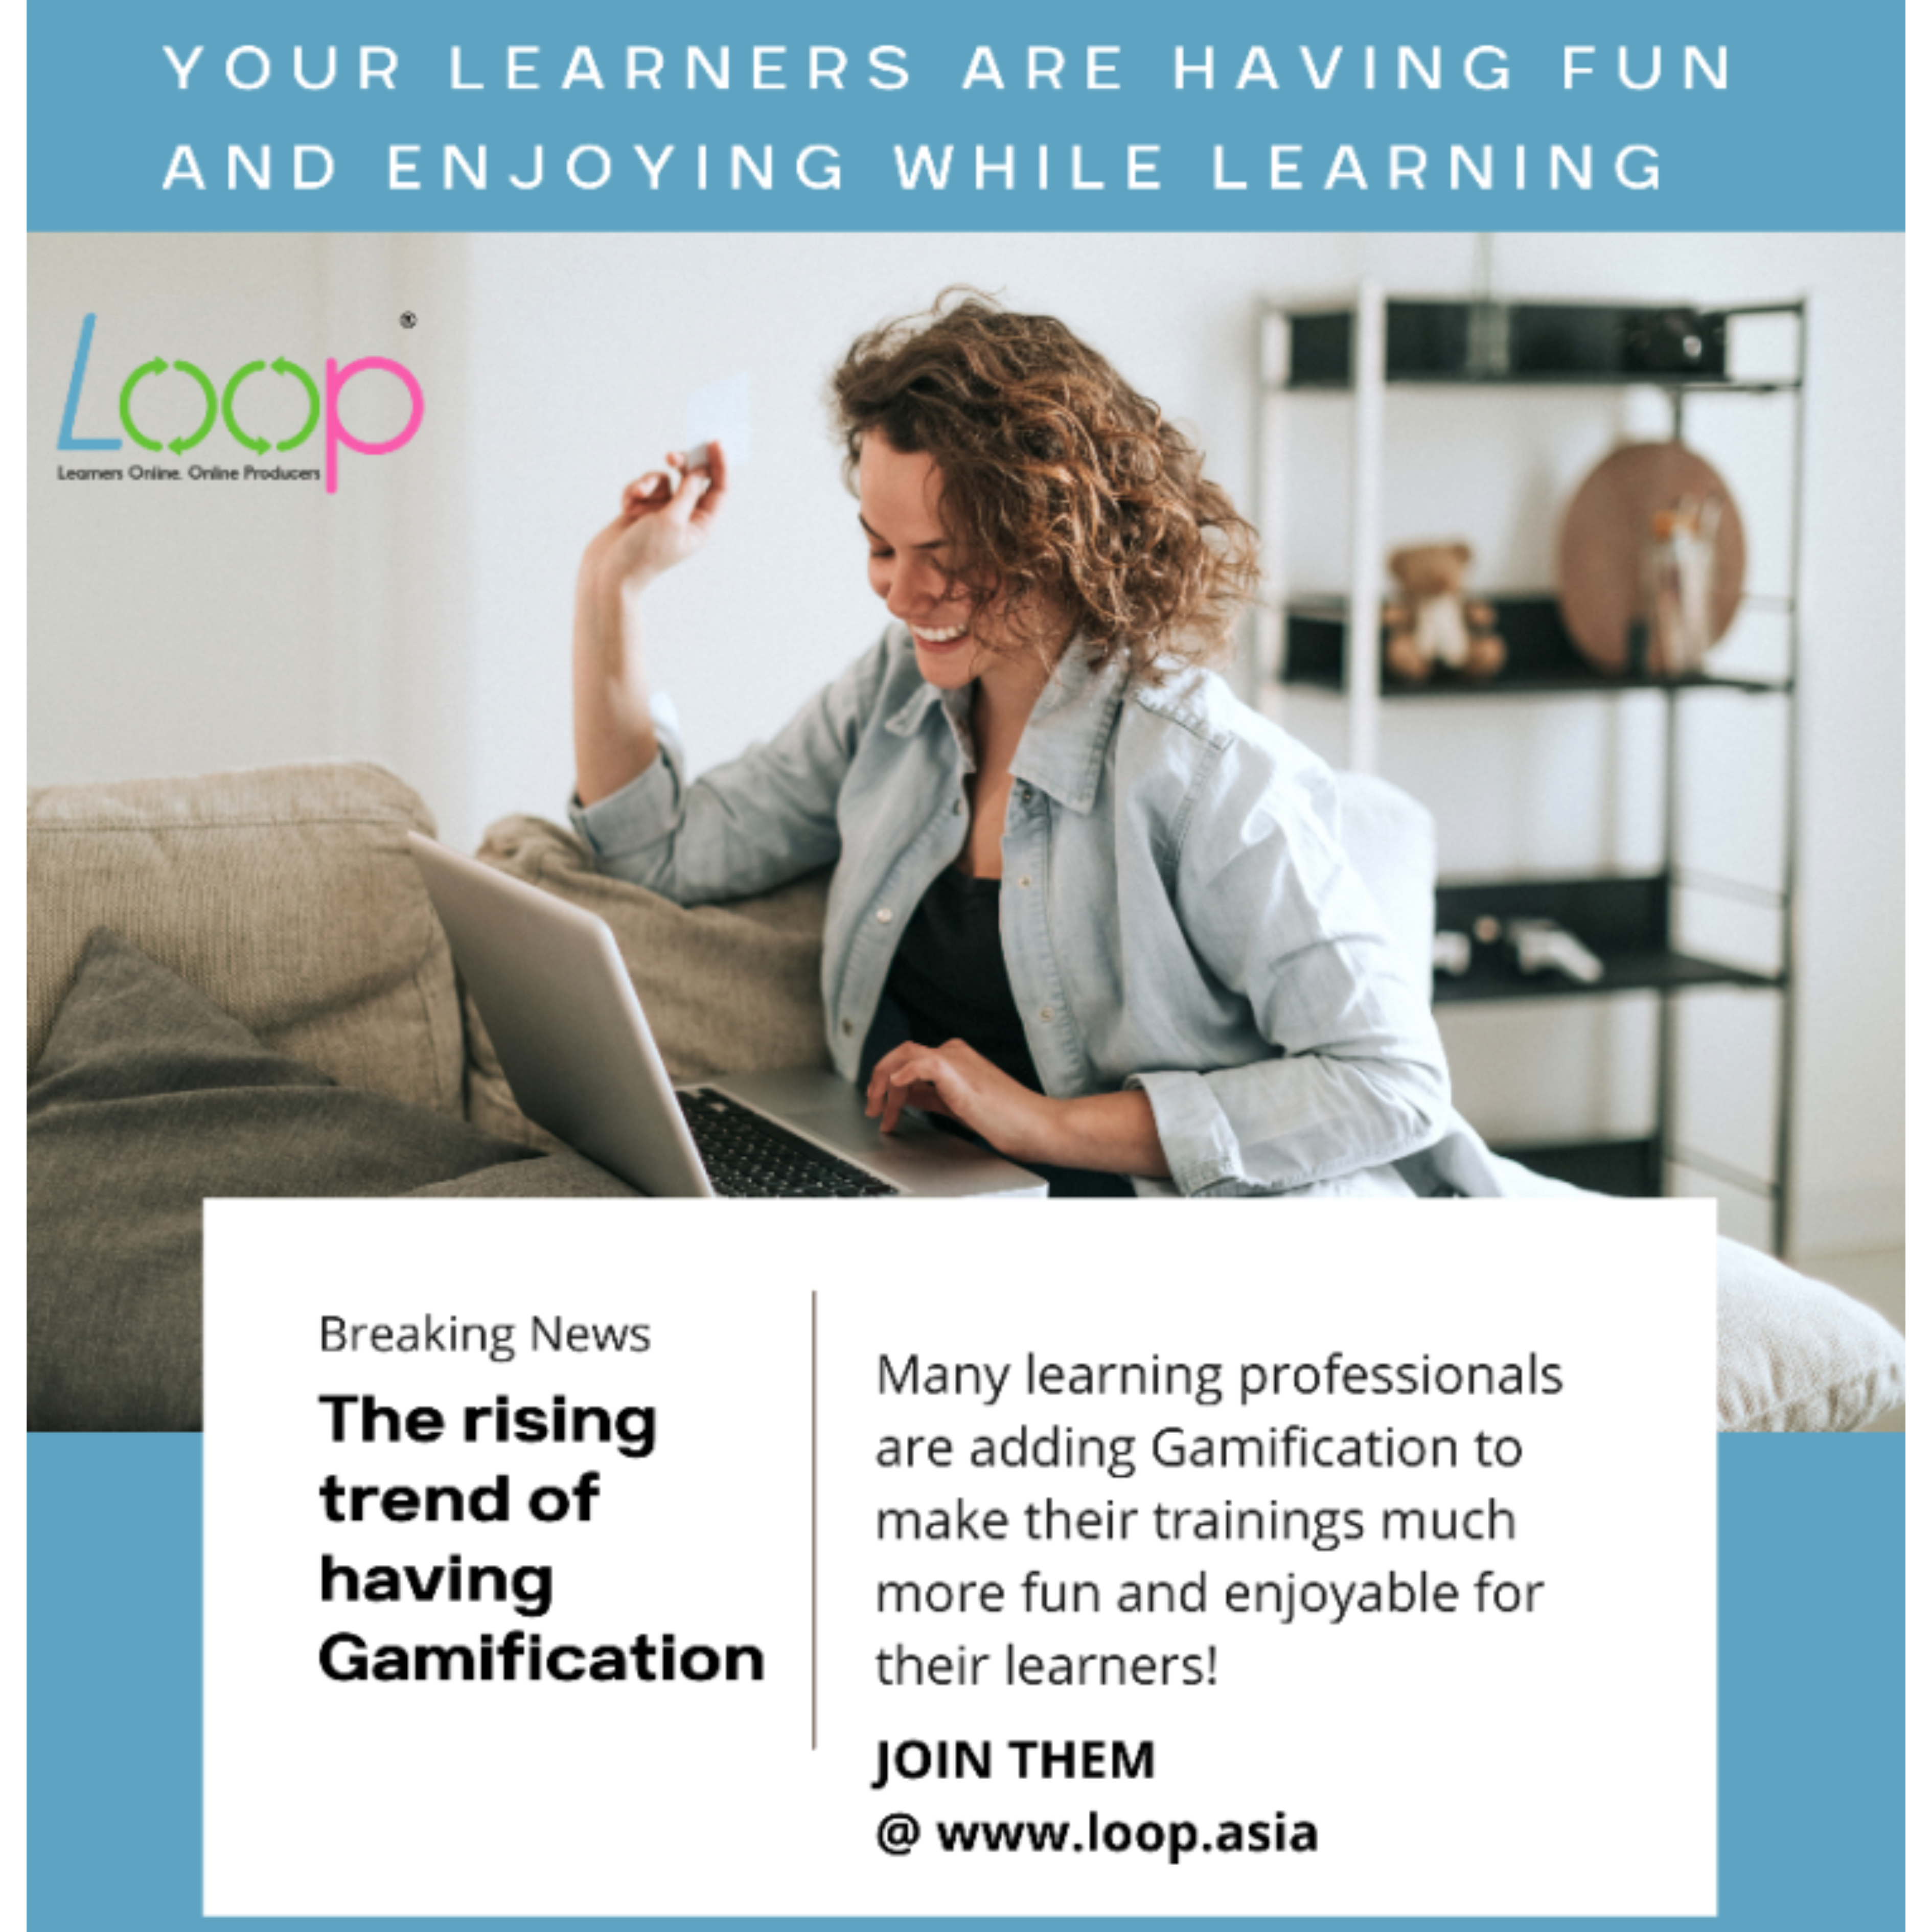 Make Trainings Fun and Enjoyable for Your Learners!